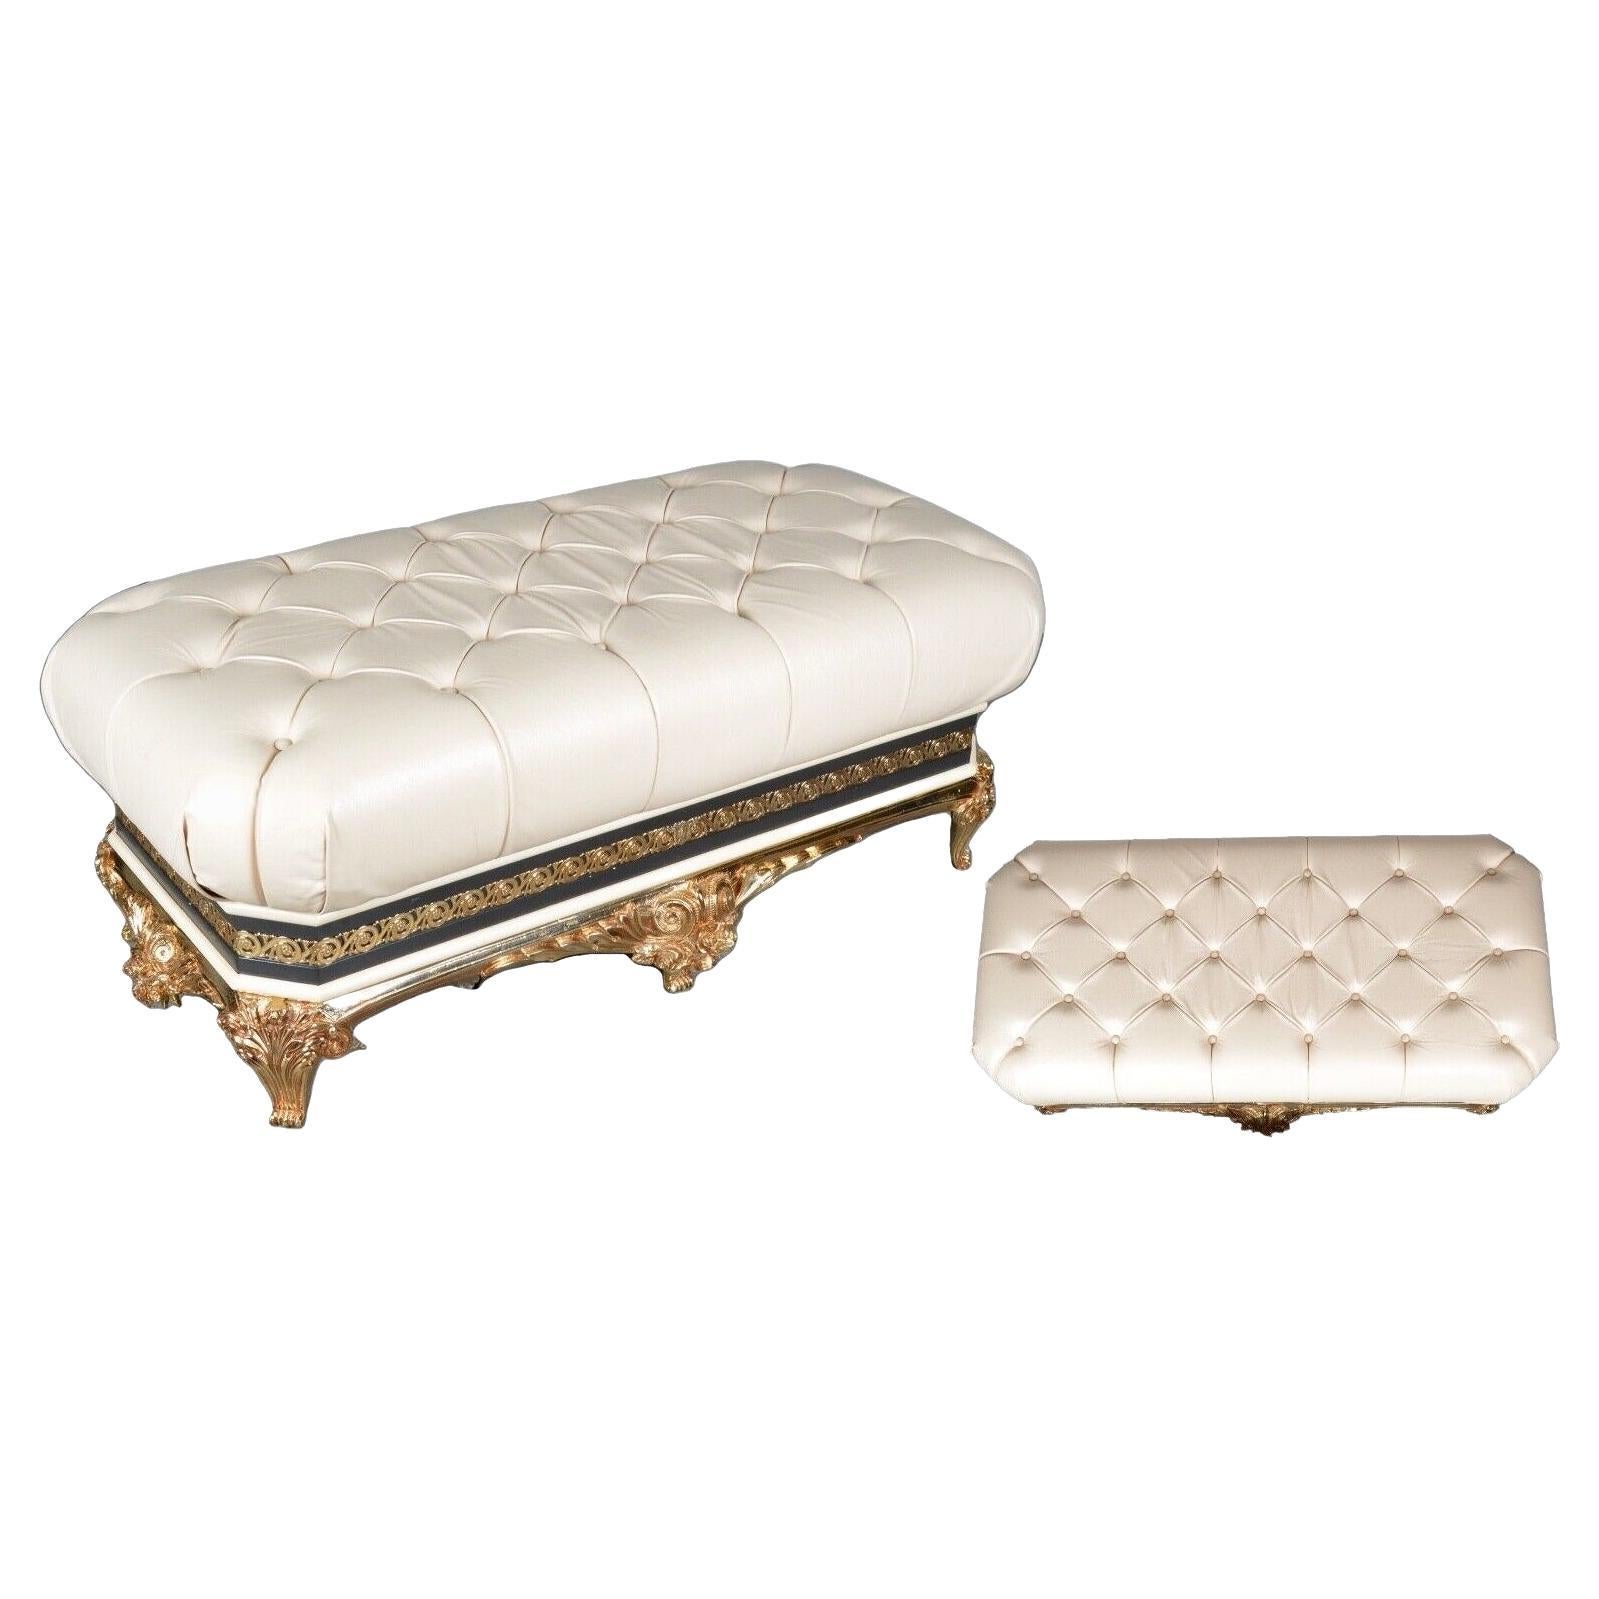 Exclusive Rococo Vidal Grau Footstool, C 1970 / Matching Furniture Available For Sale